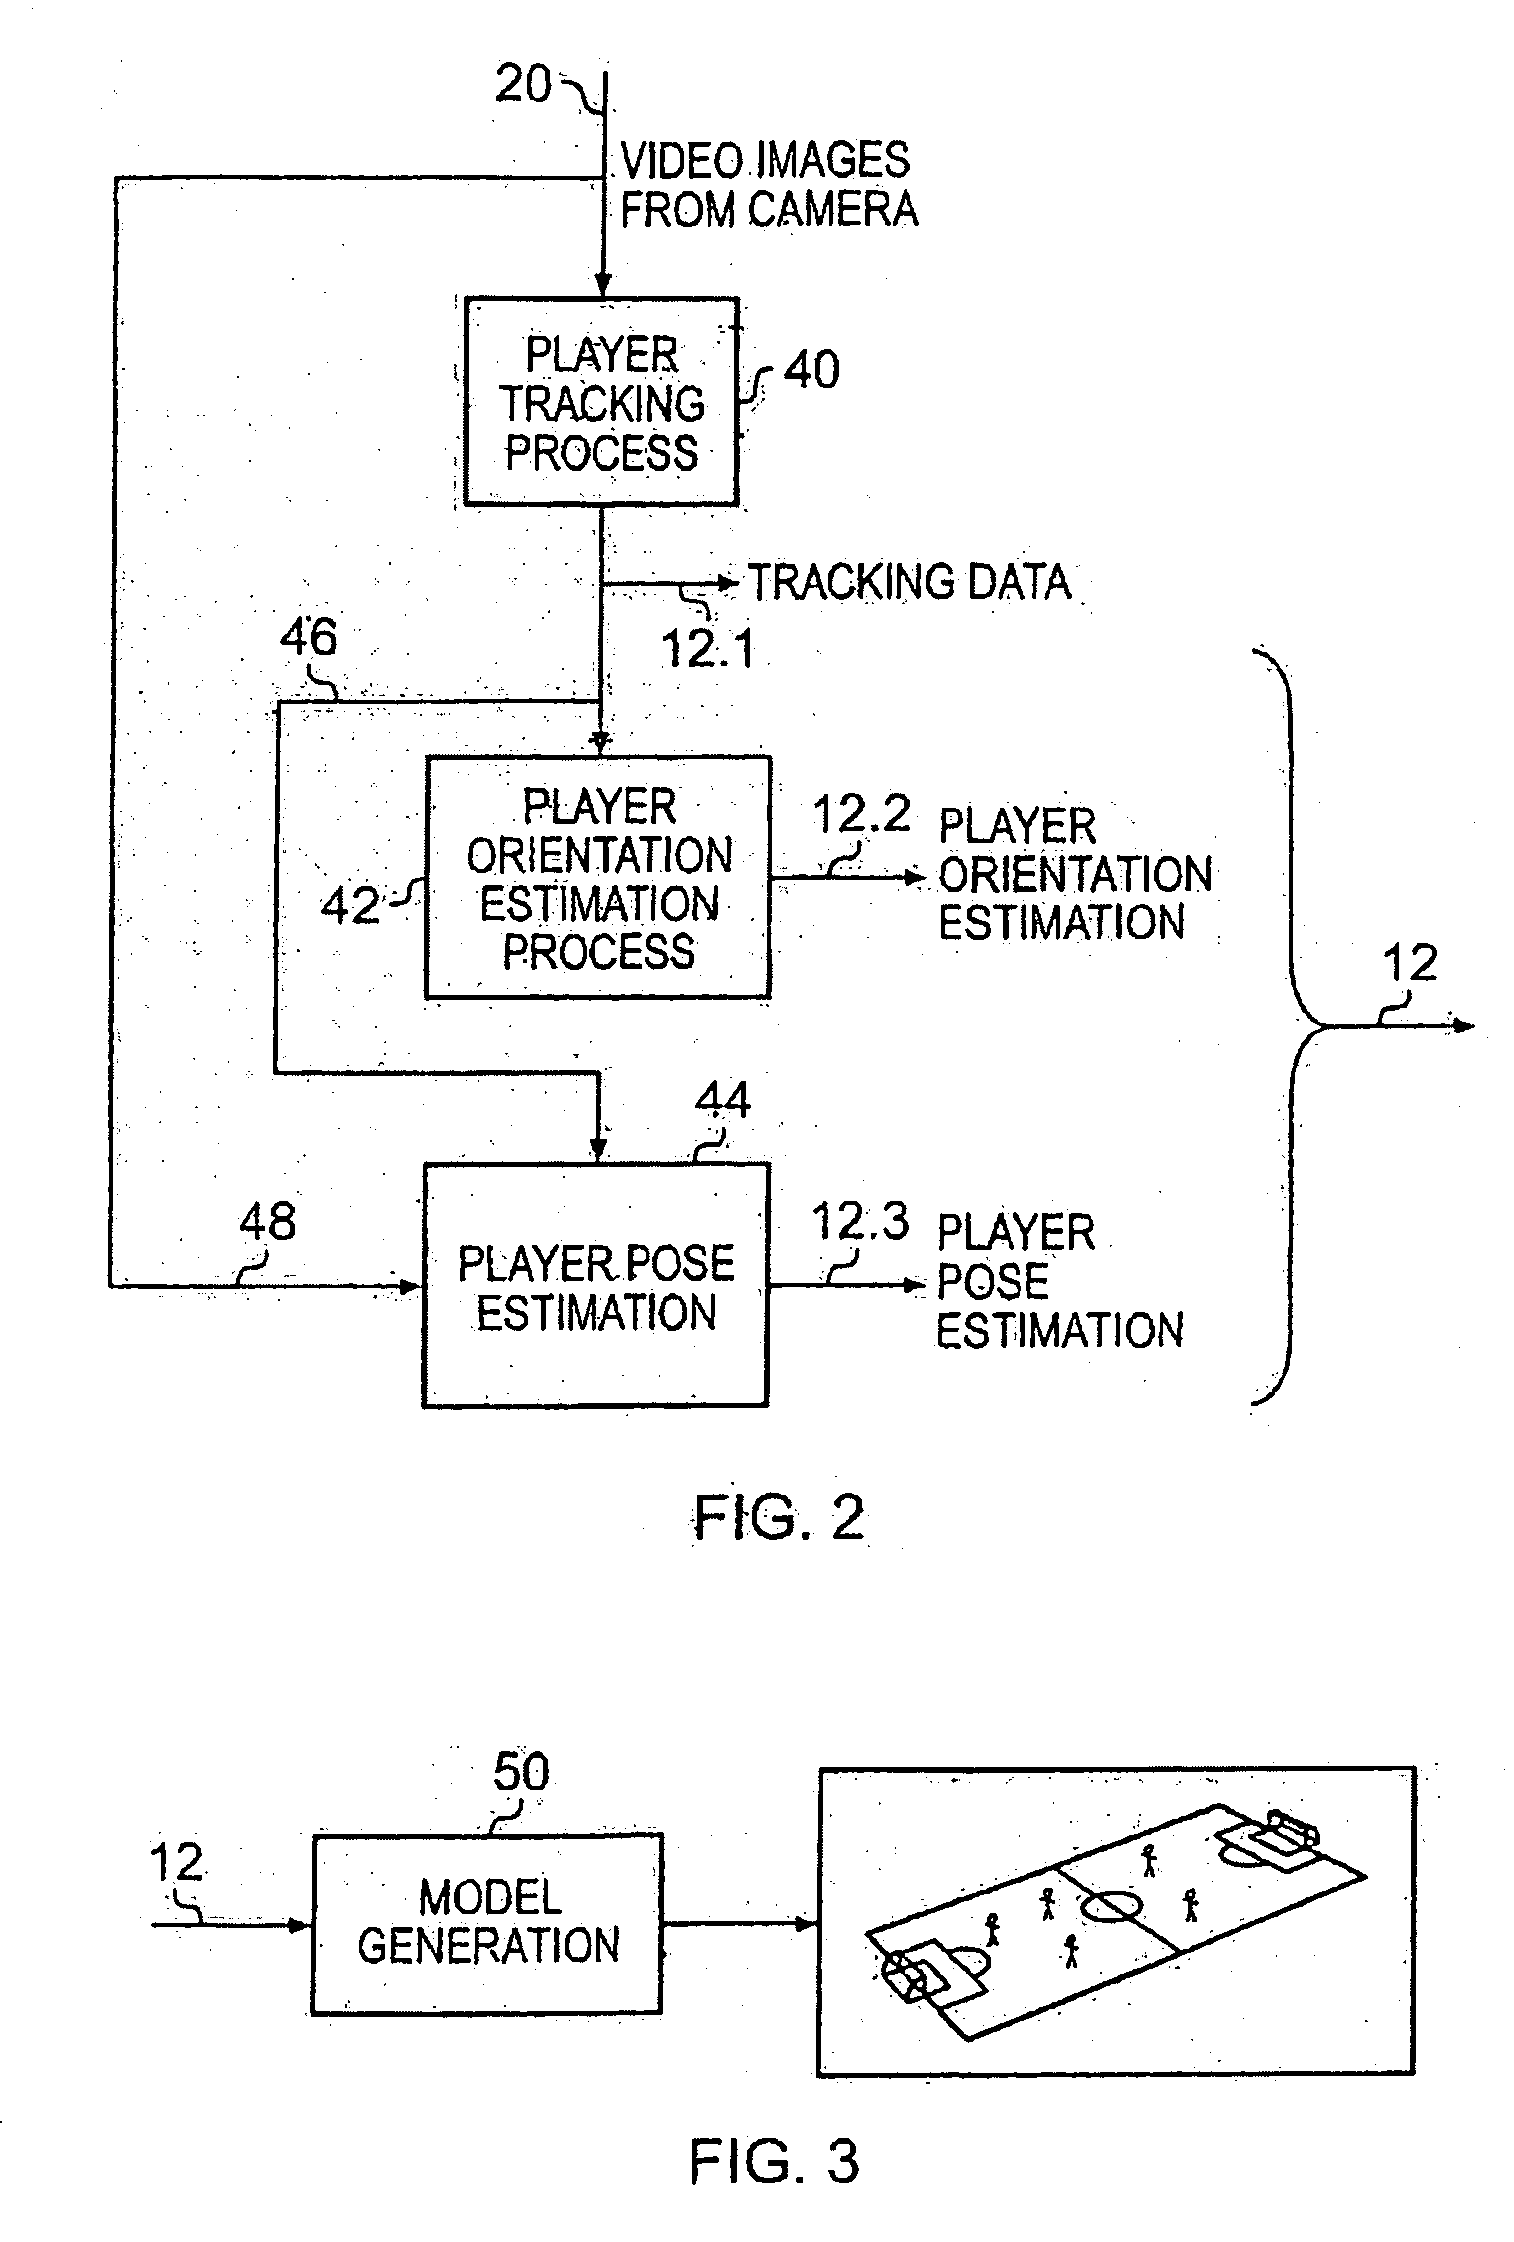 Image processing apparatus and method for estimating orientation